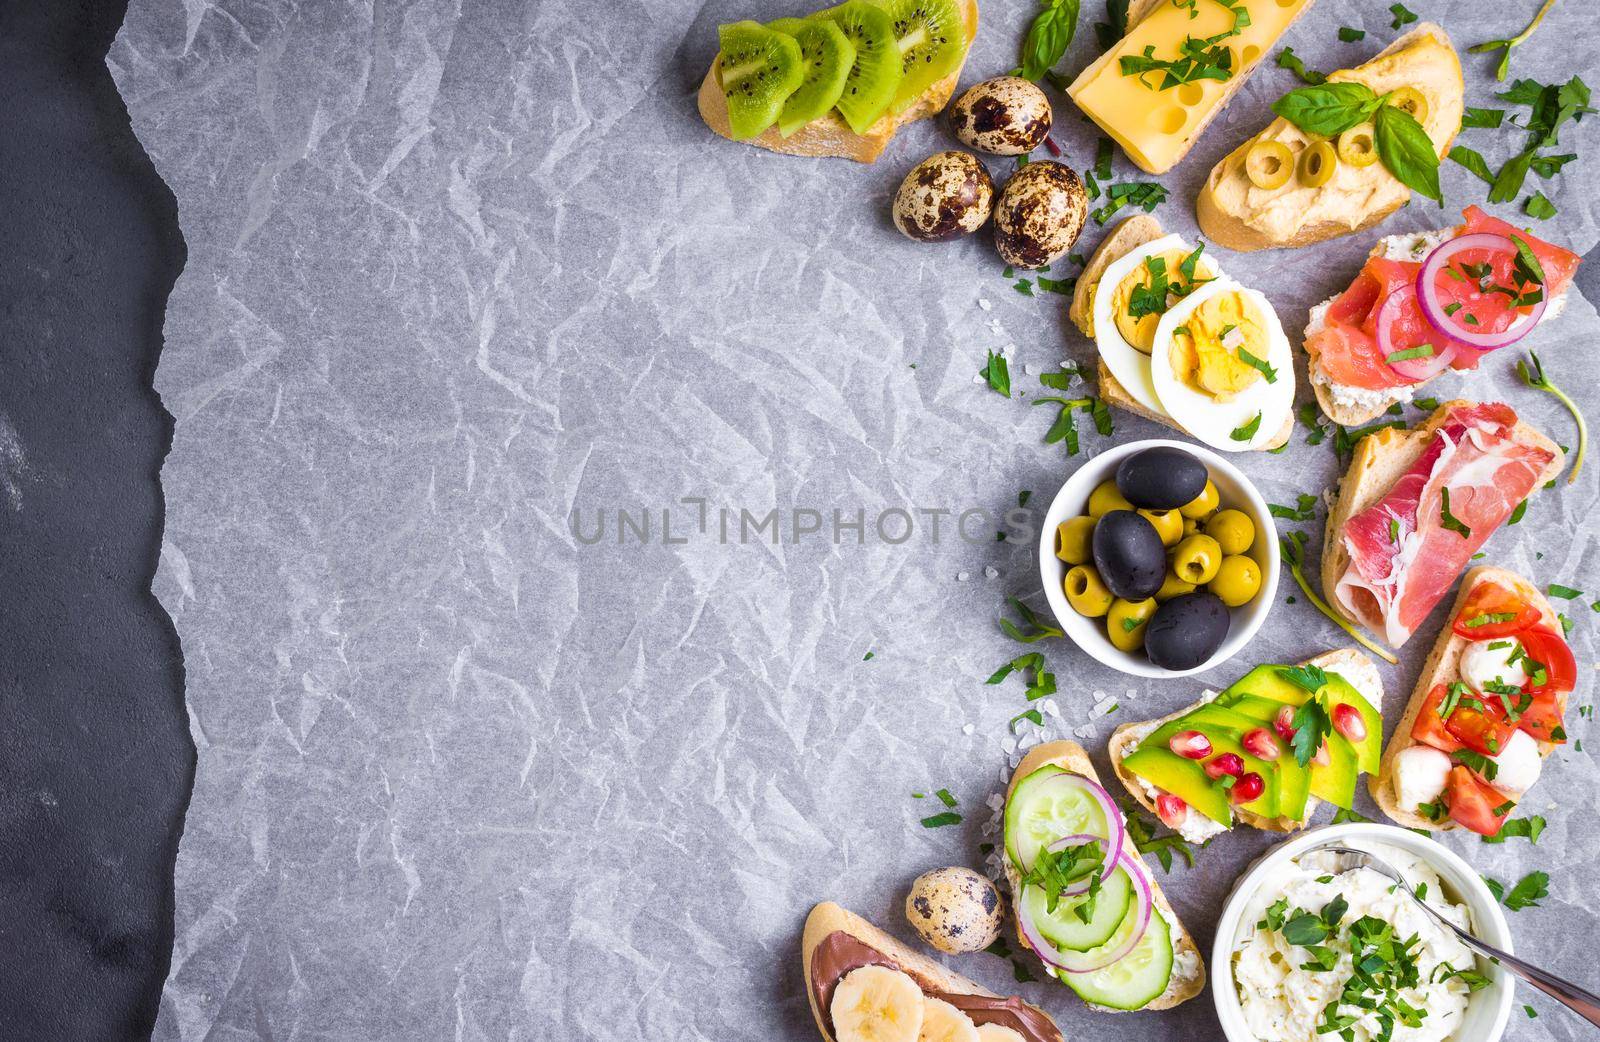 Assorted healthy sandwiches set background. Sandwich bar or buffet. Ciabatta sandwiches with dips, fish, cheese, meat, vegetables, fruits. Space for text. Top view. Ingredients for making sandwiches